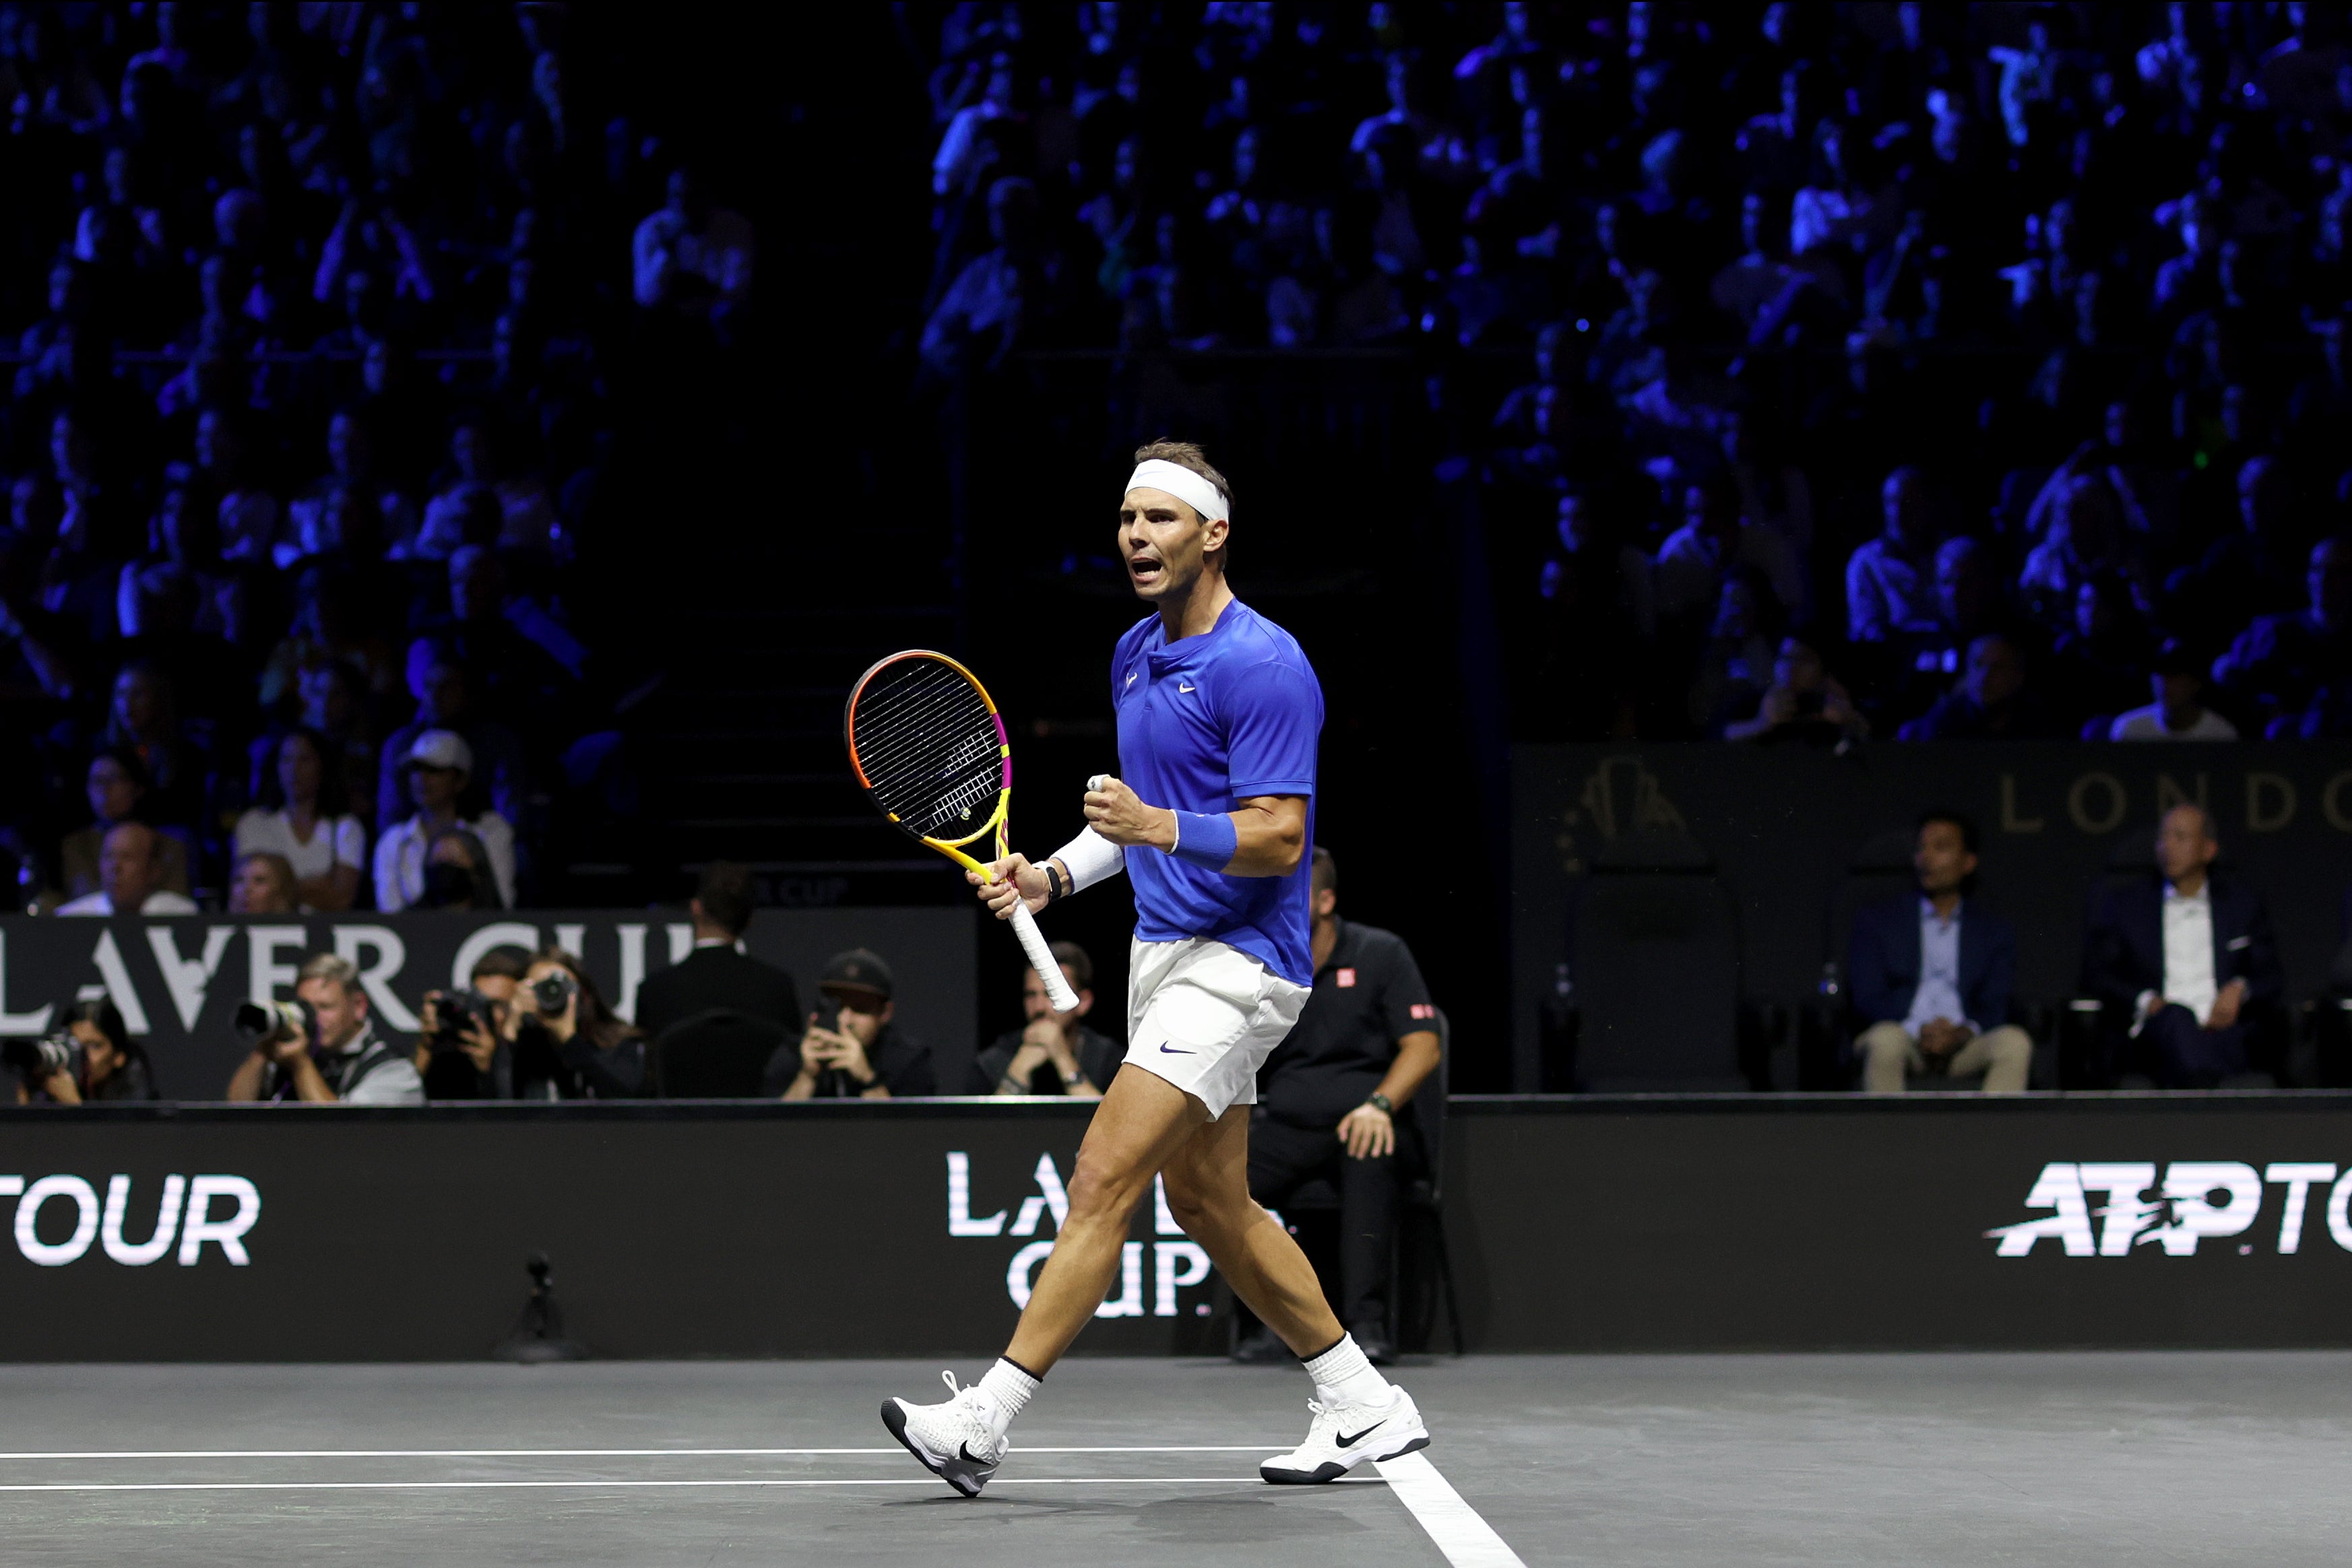 Rafael Nadal will return to the Laver Cup as he nears retirement